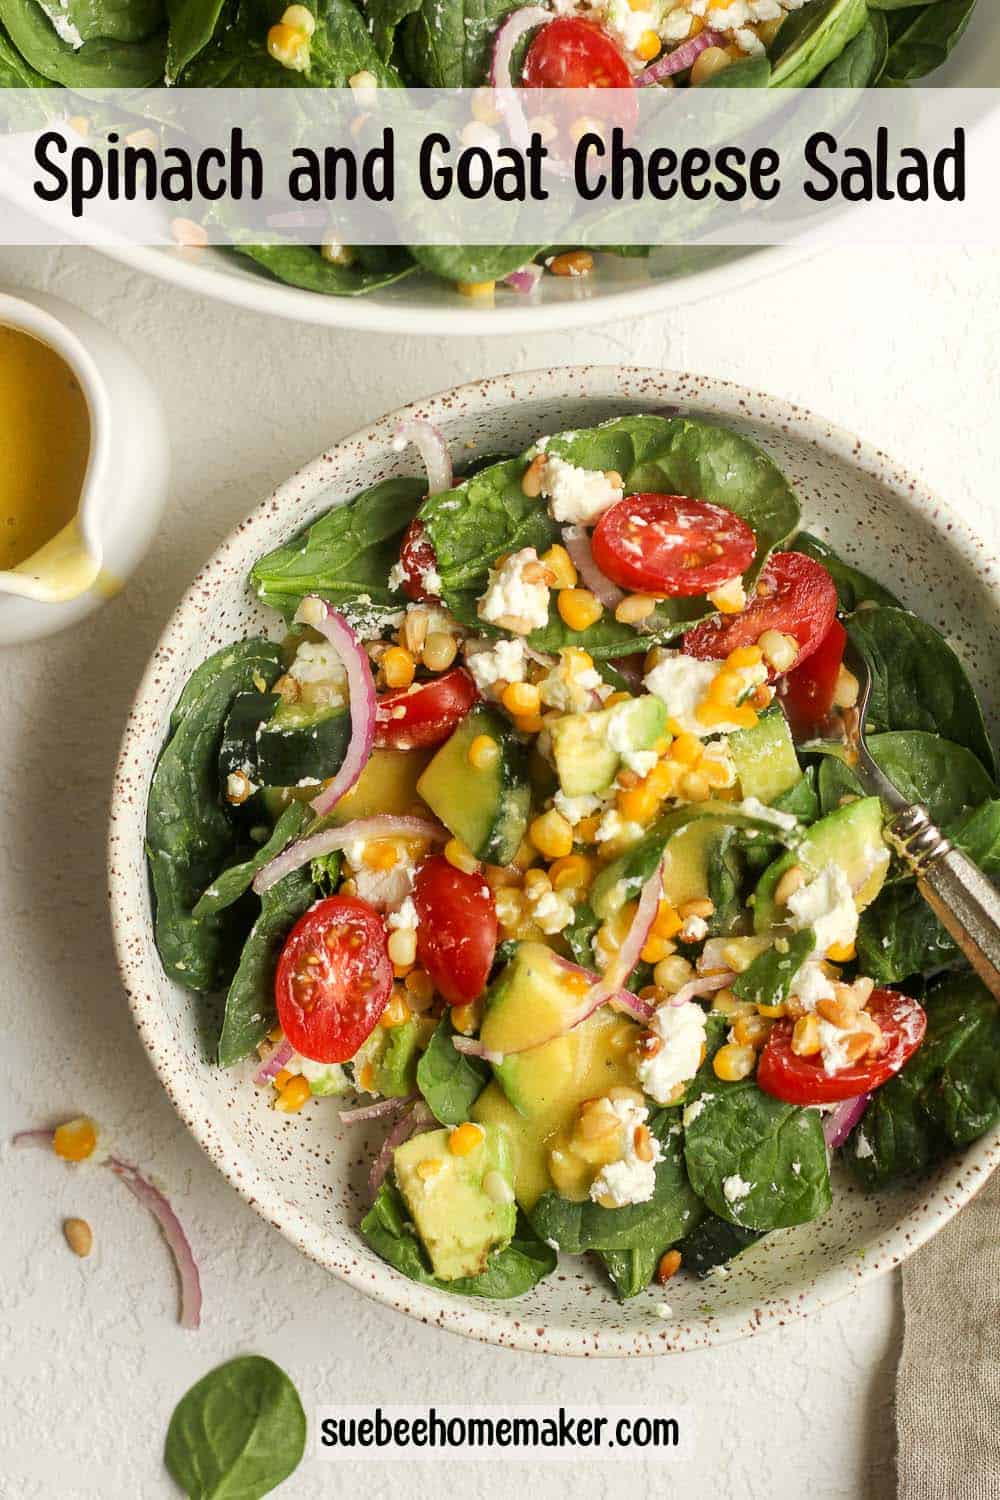 A serving of spinach and goat cheese salad with a small bowl of dressing.